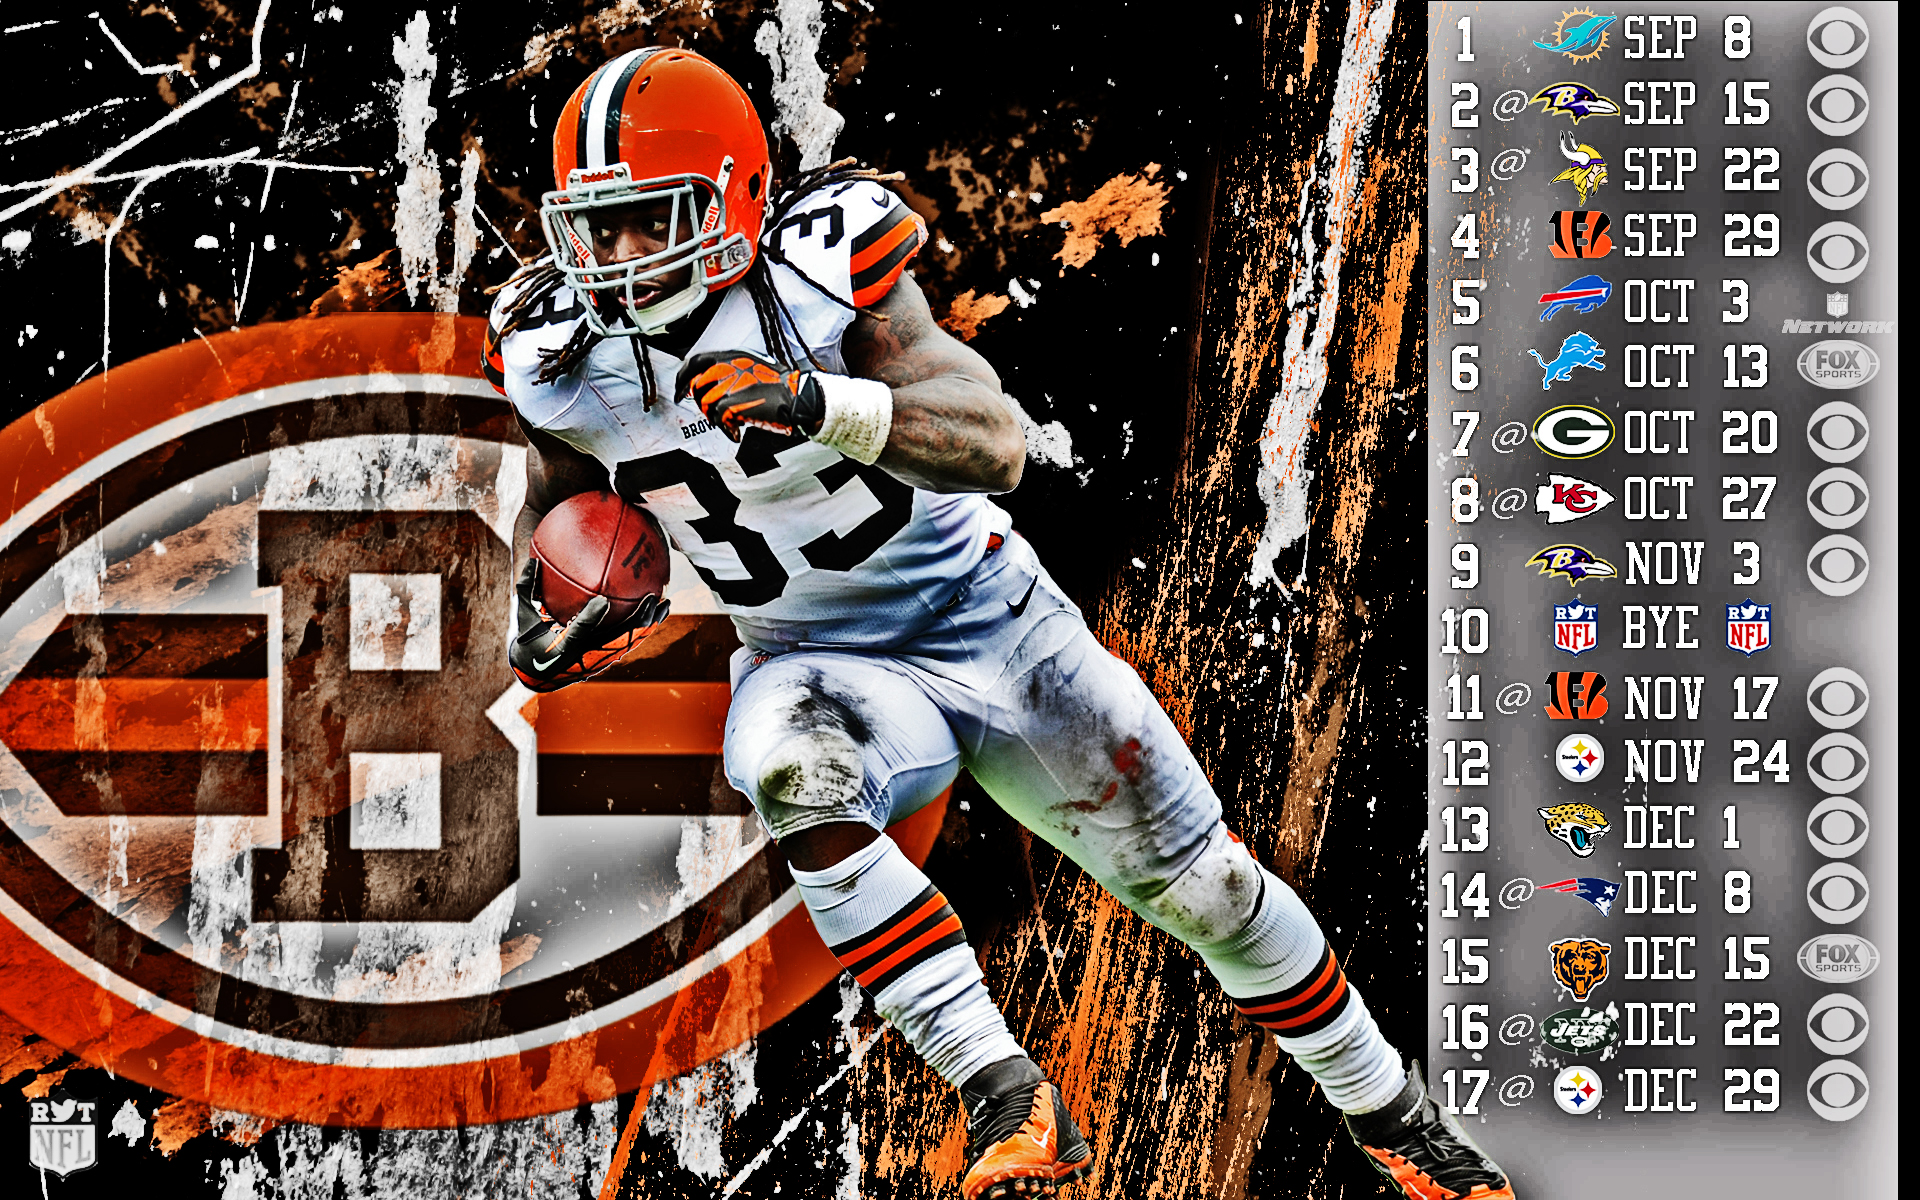 Free download NFL Cleveland Browns 2012 Schedule 1920x1080 HD NFL